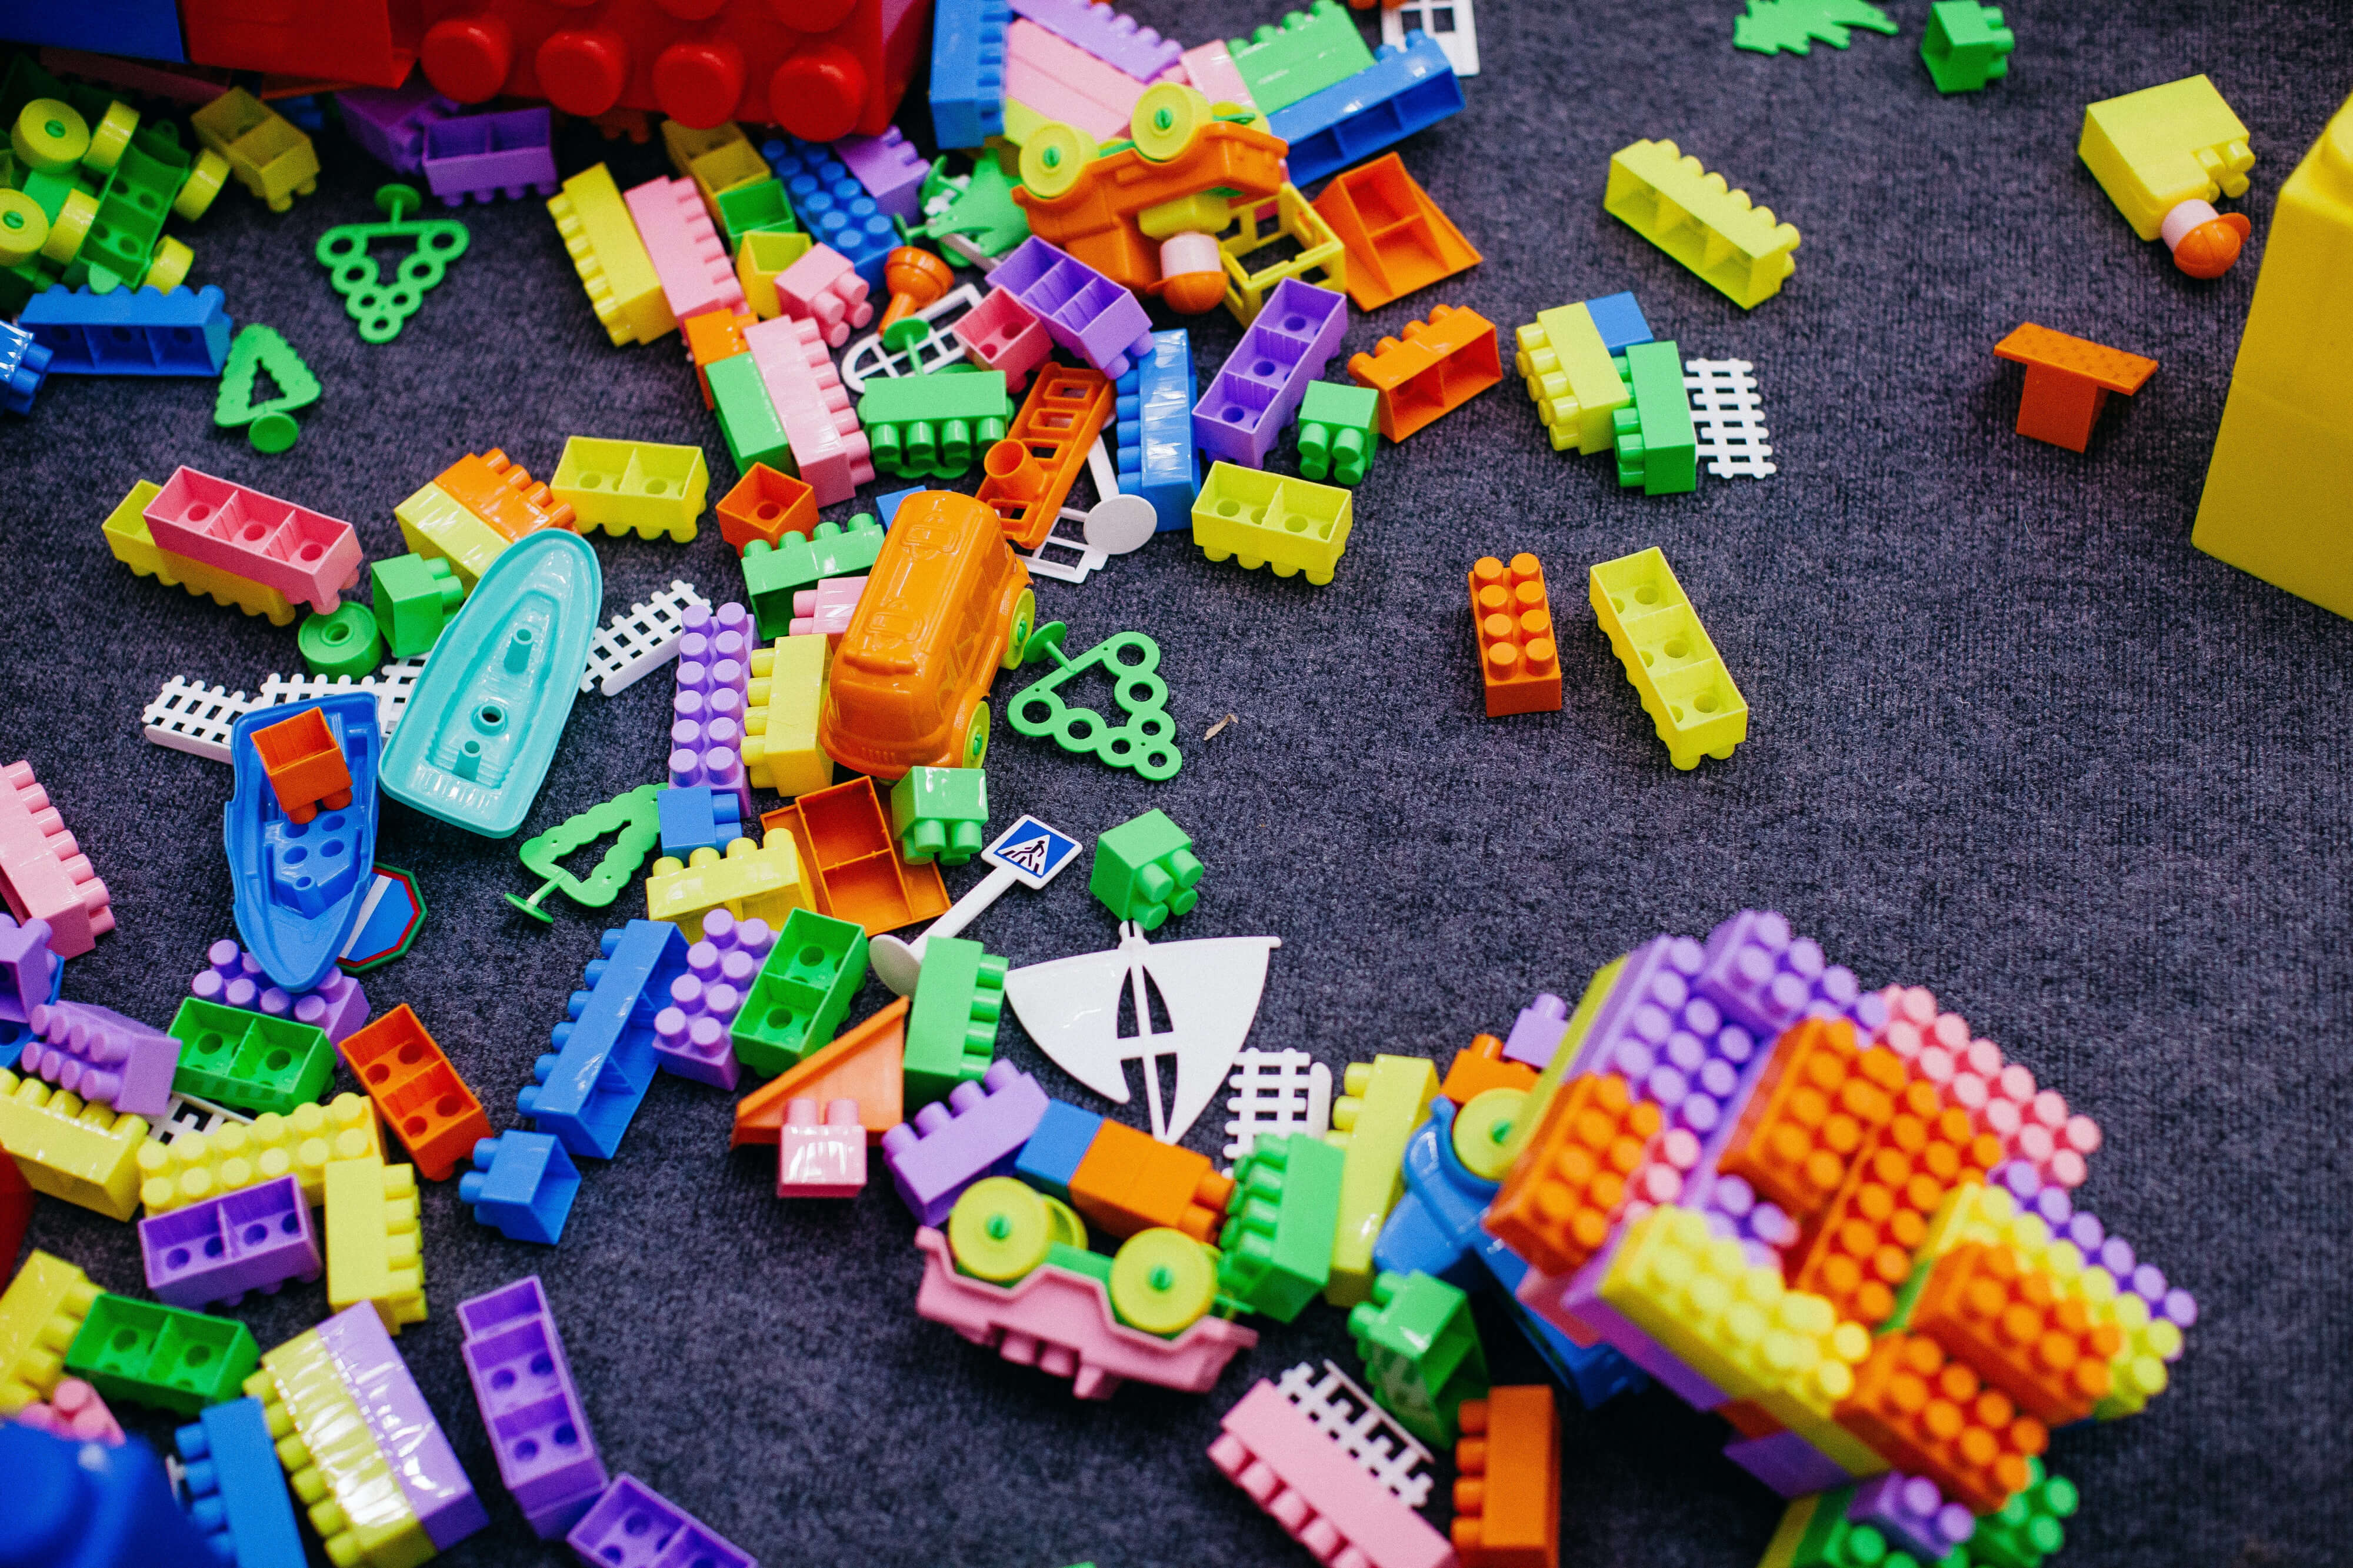 Construction toys scattered over the floor